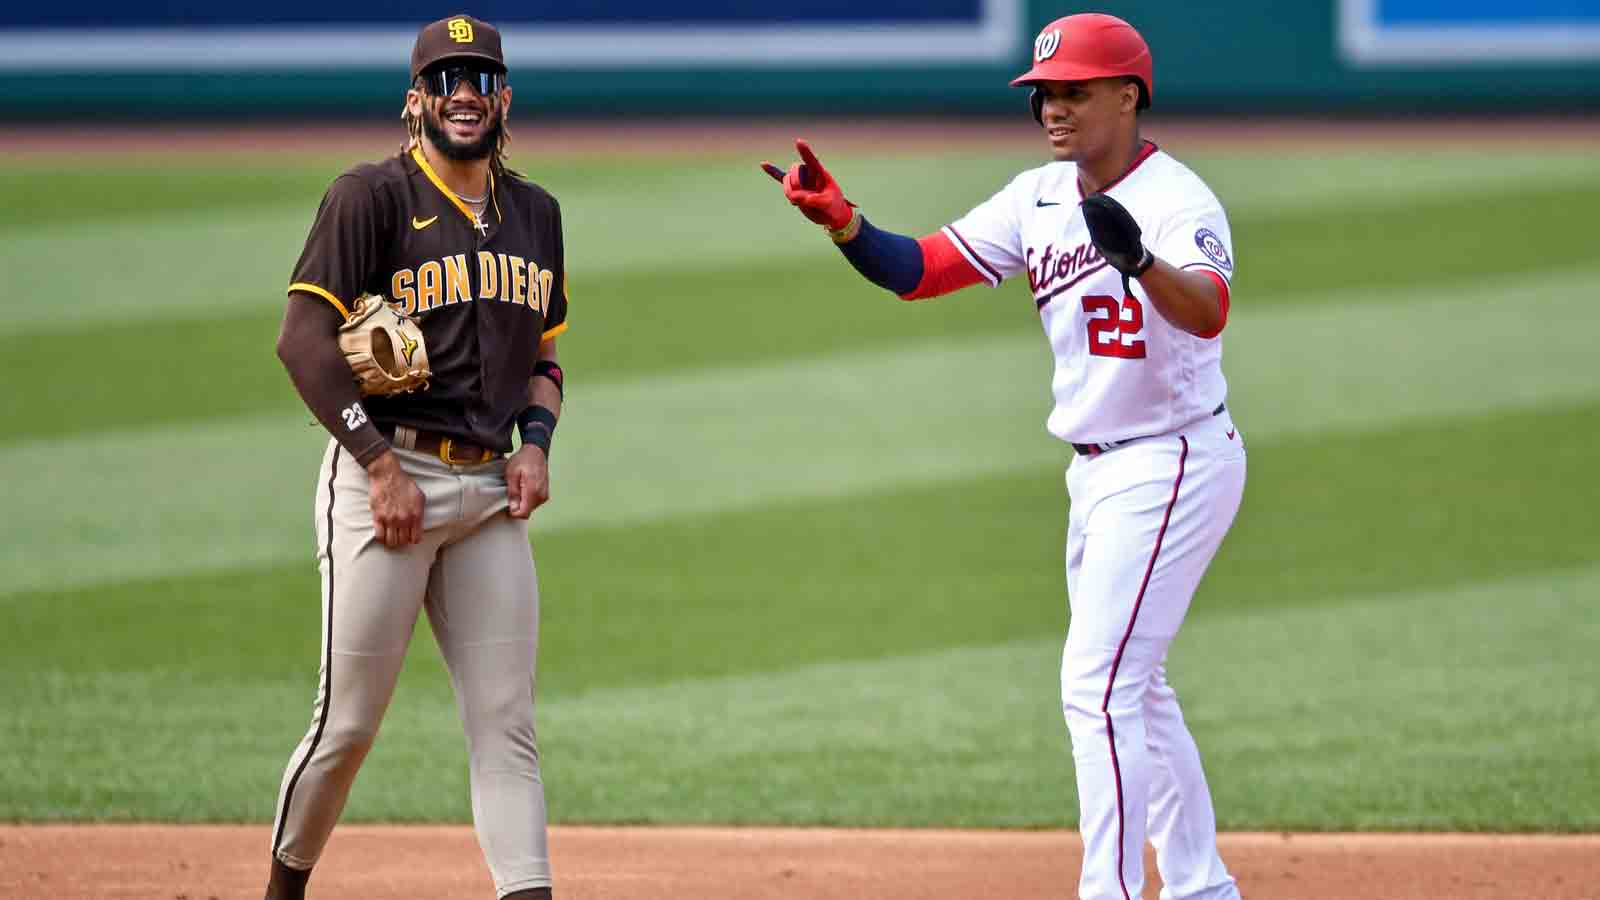 Padres News: Juan Soto and Josh Hader Named to NL All-Star Team